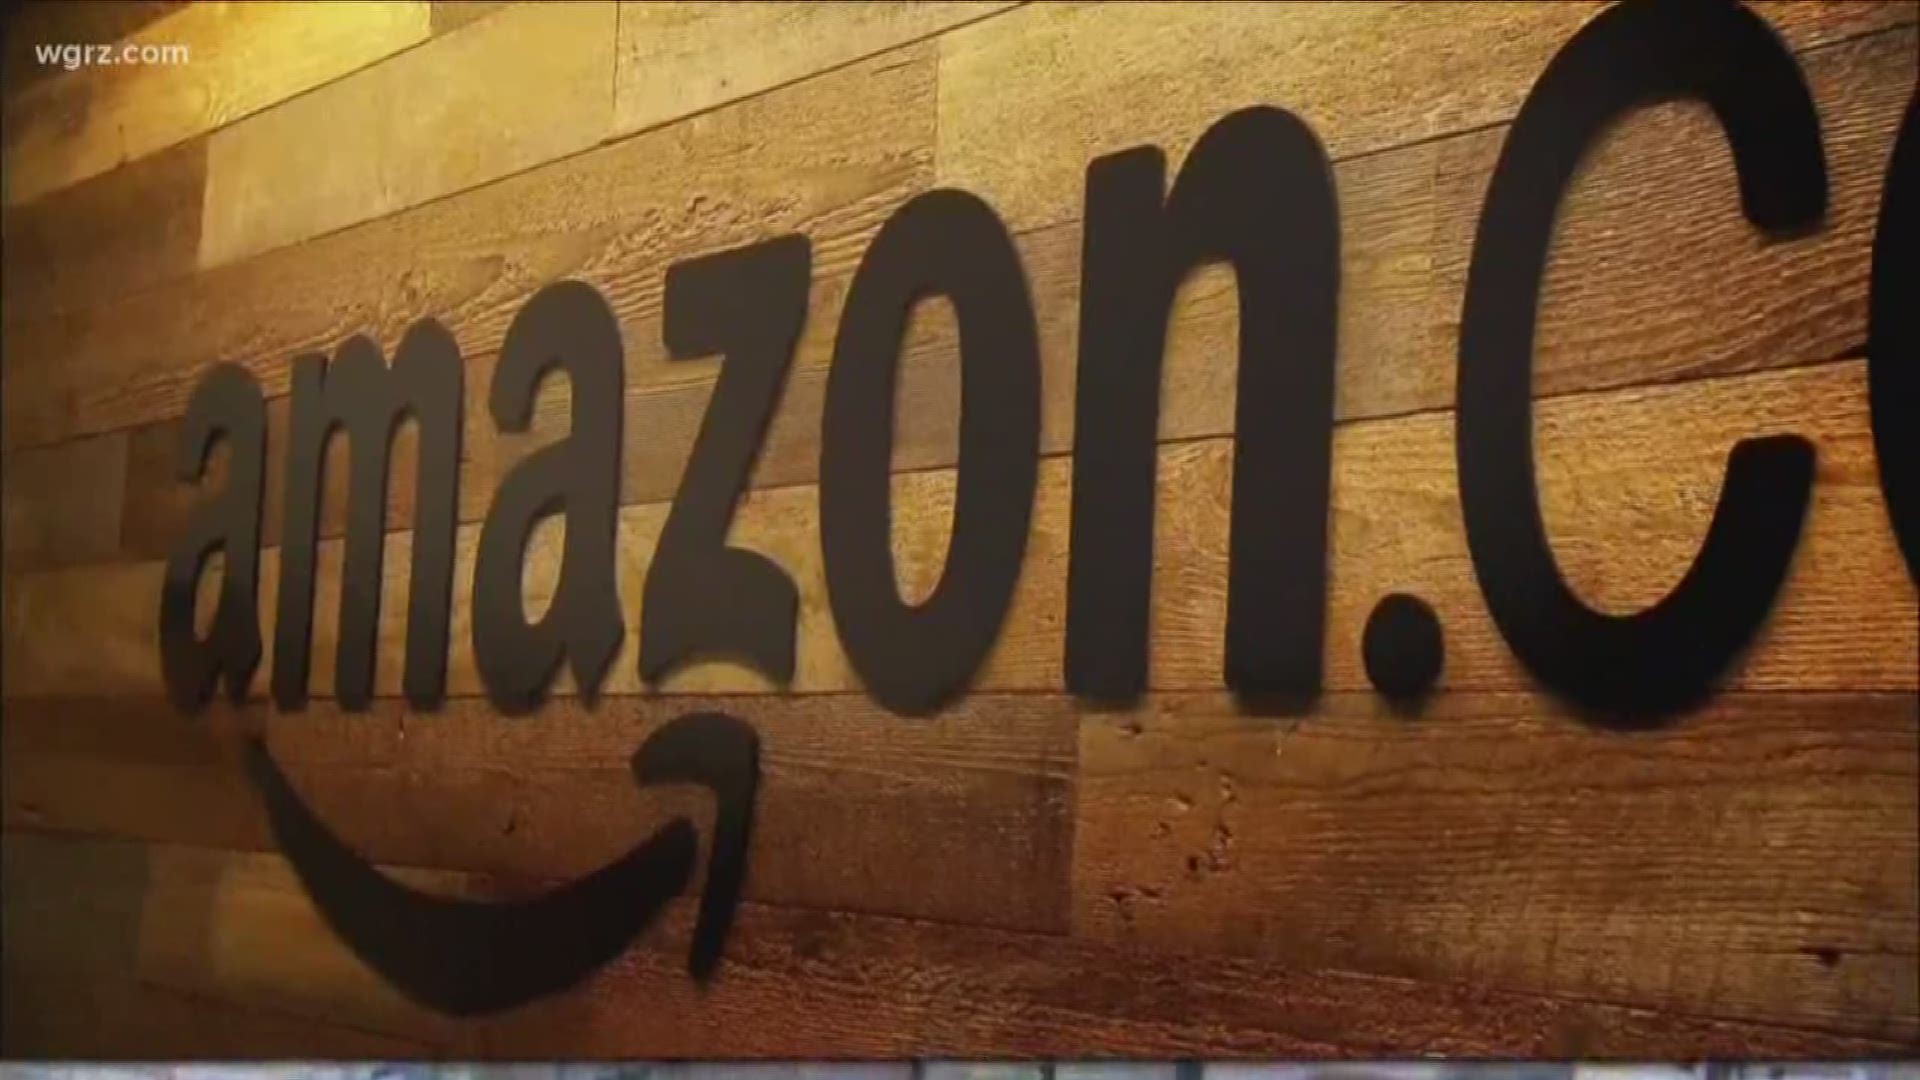 Amazon Comes To NYC, And You Paid For It